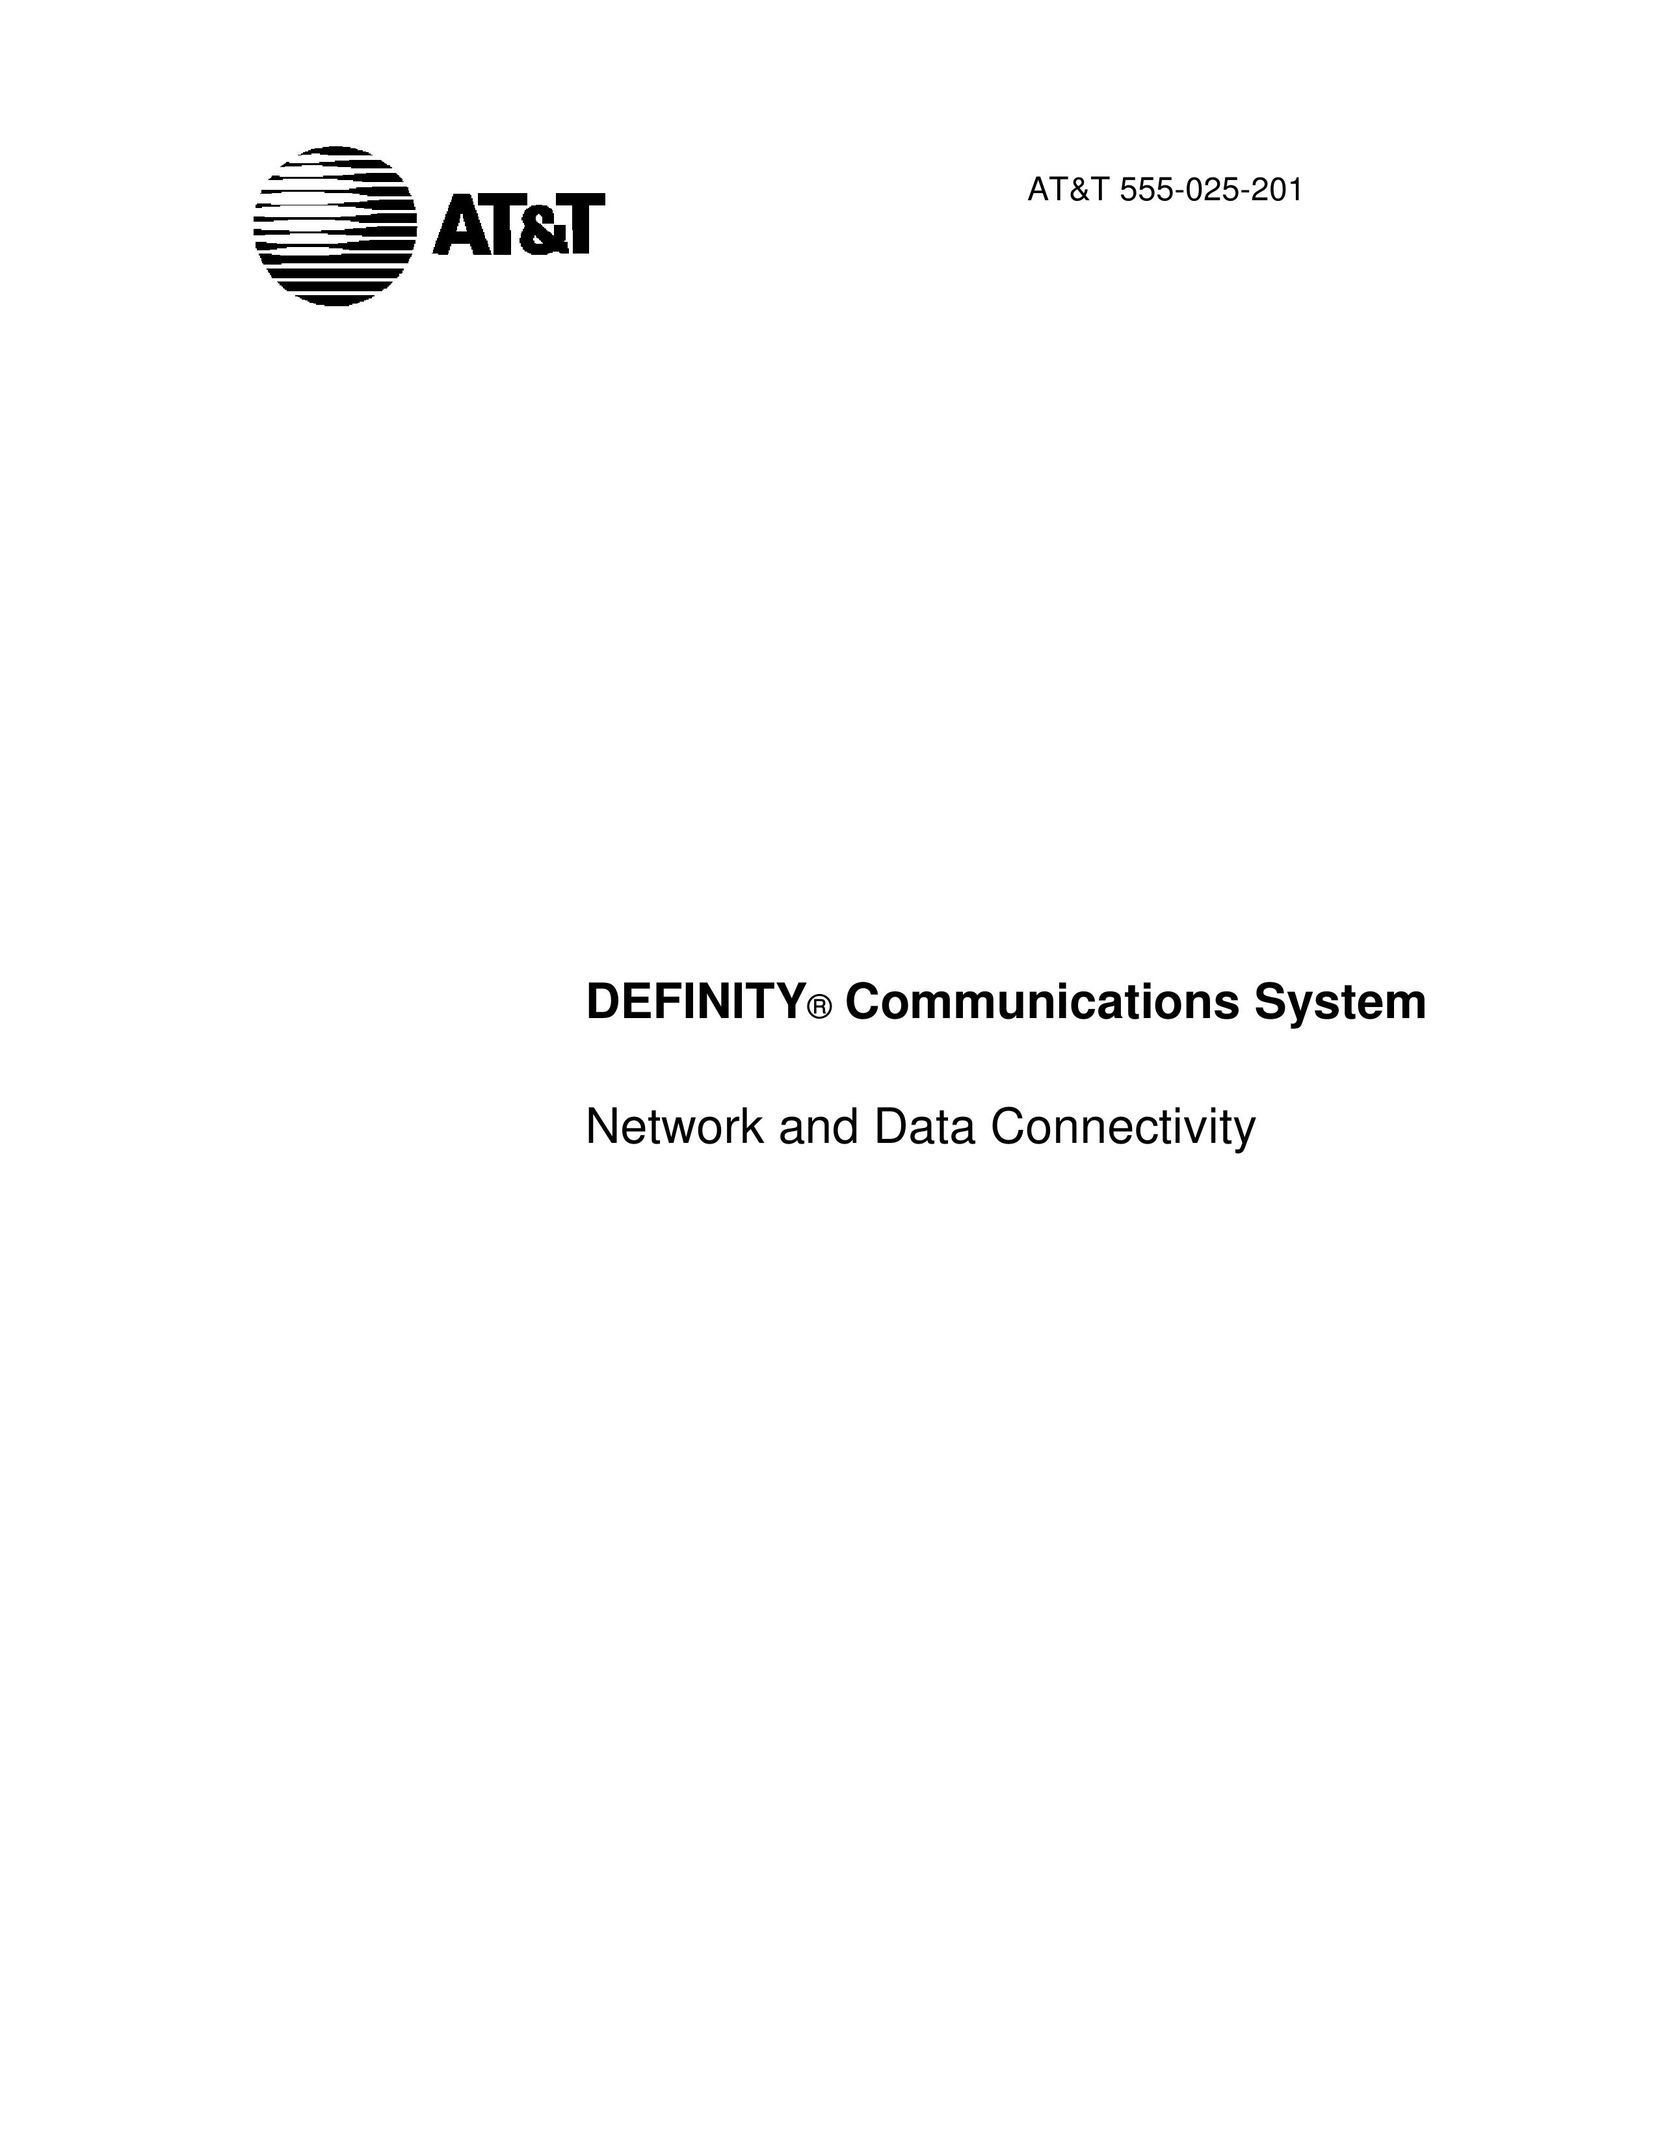 AT&T 7300 series Network Router User Manual